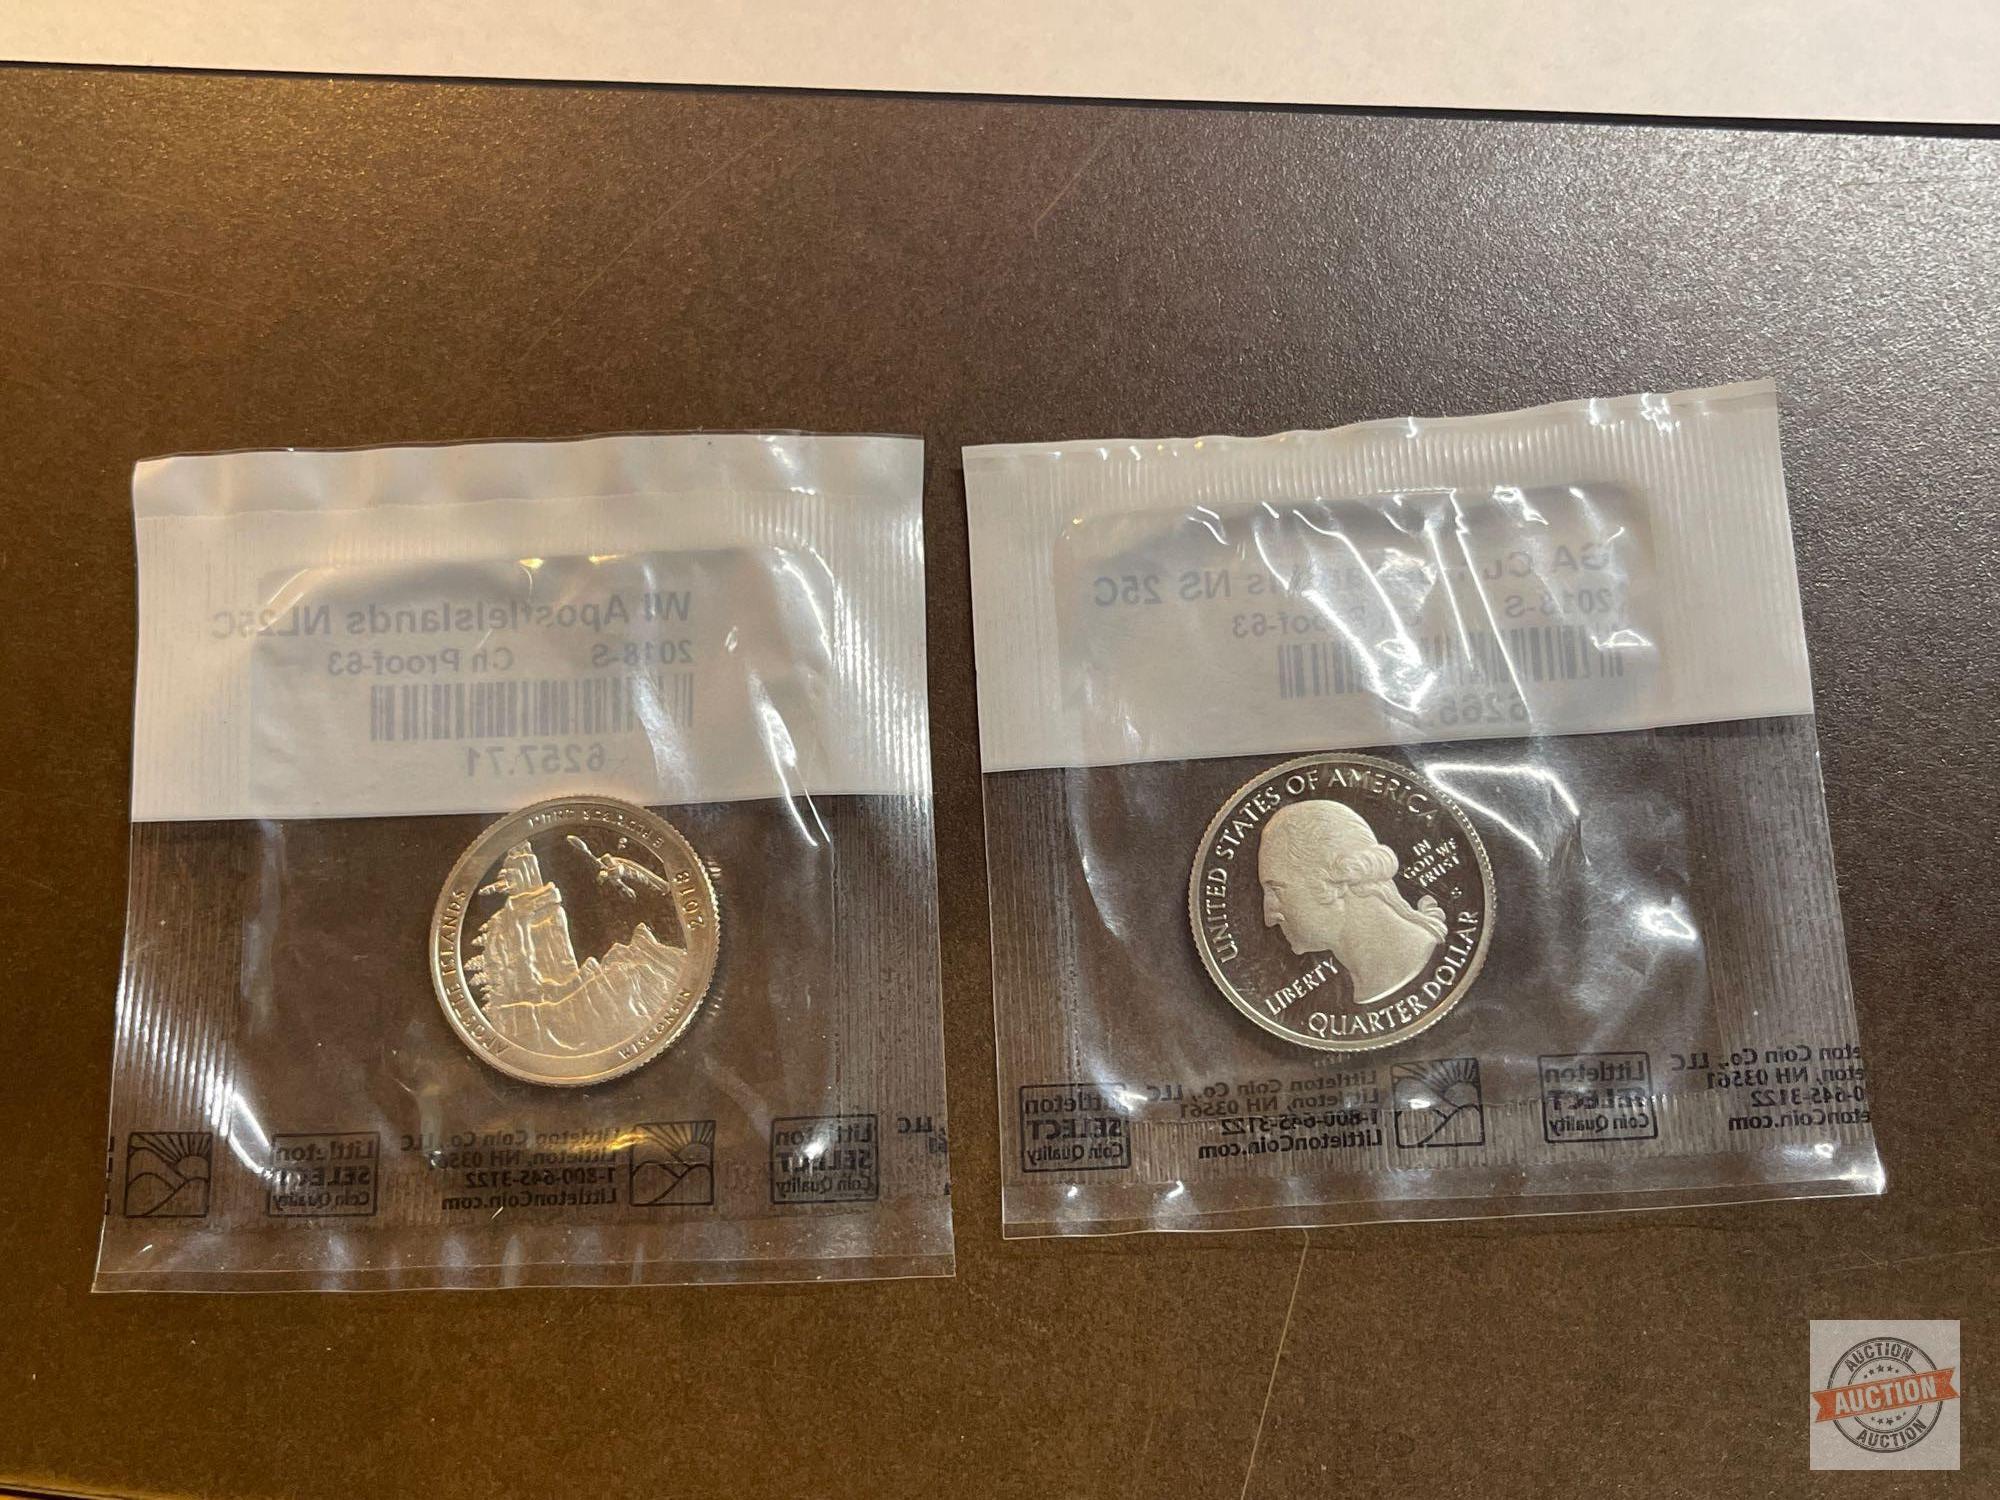 Coins - 2 silver proof state quarters in pkgs., 2018-S Apostle Islands WI NL 25C & Cumberland Island